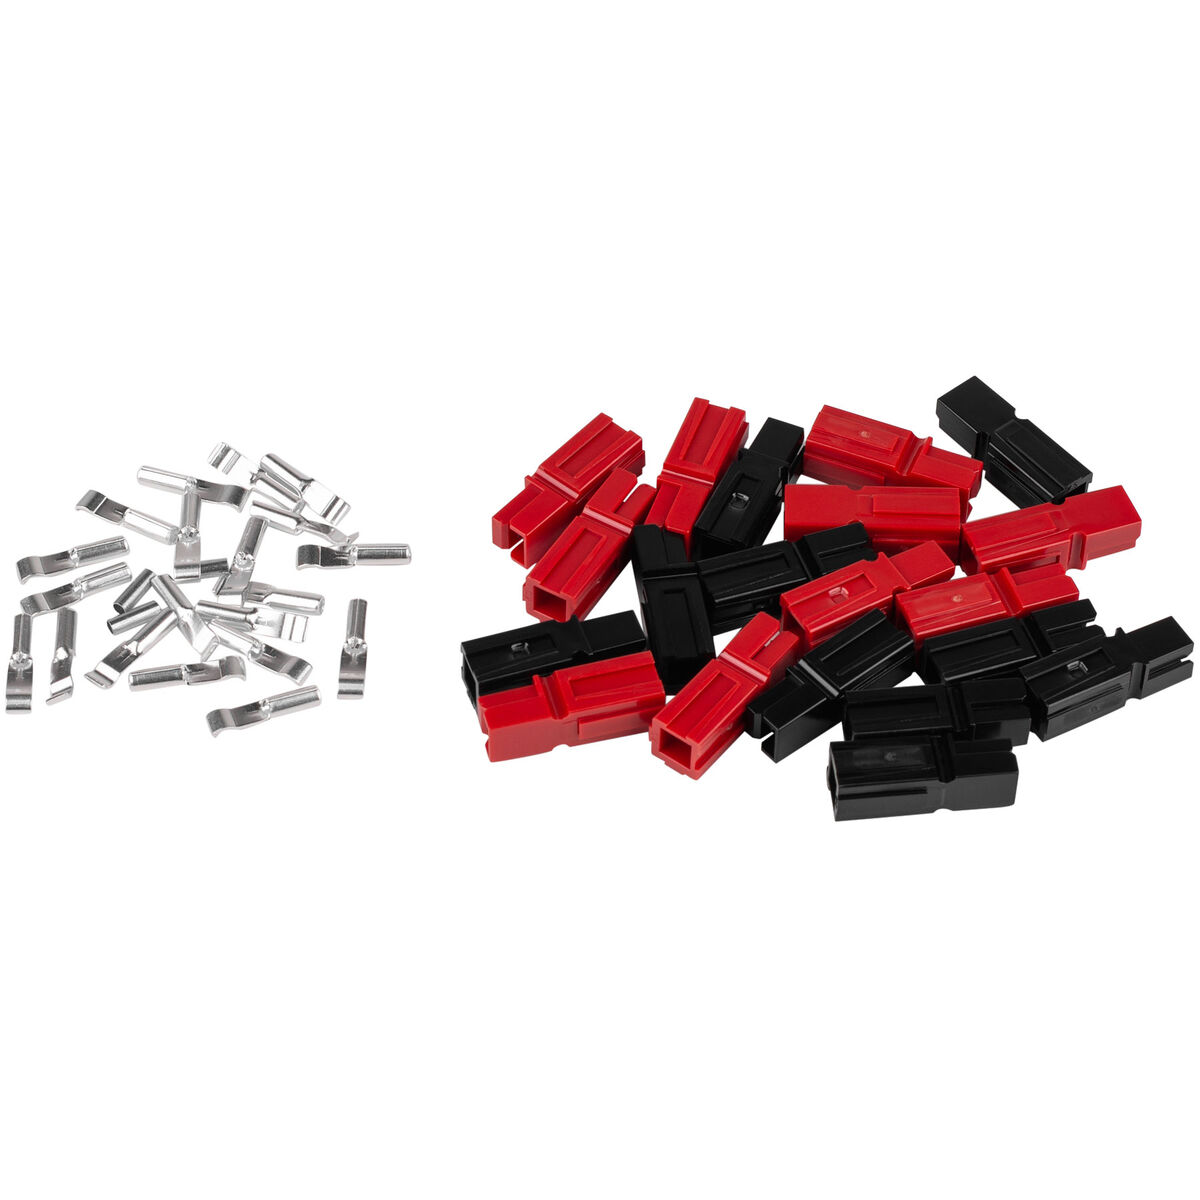 20-16 AWG 15A Red/Black DC Quick Disconnect Power Connectors 10 Pair